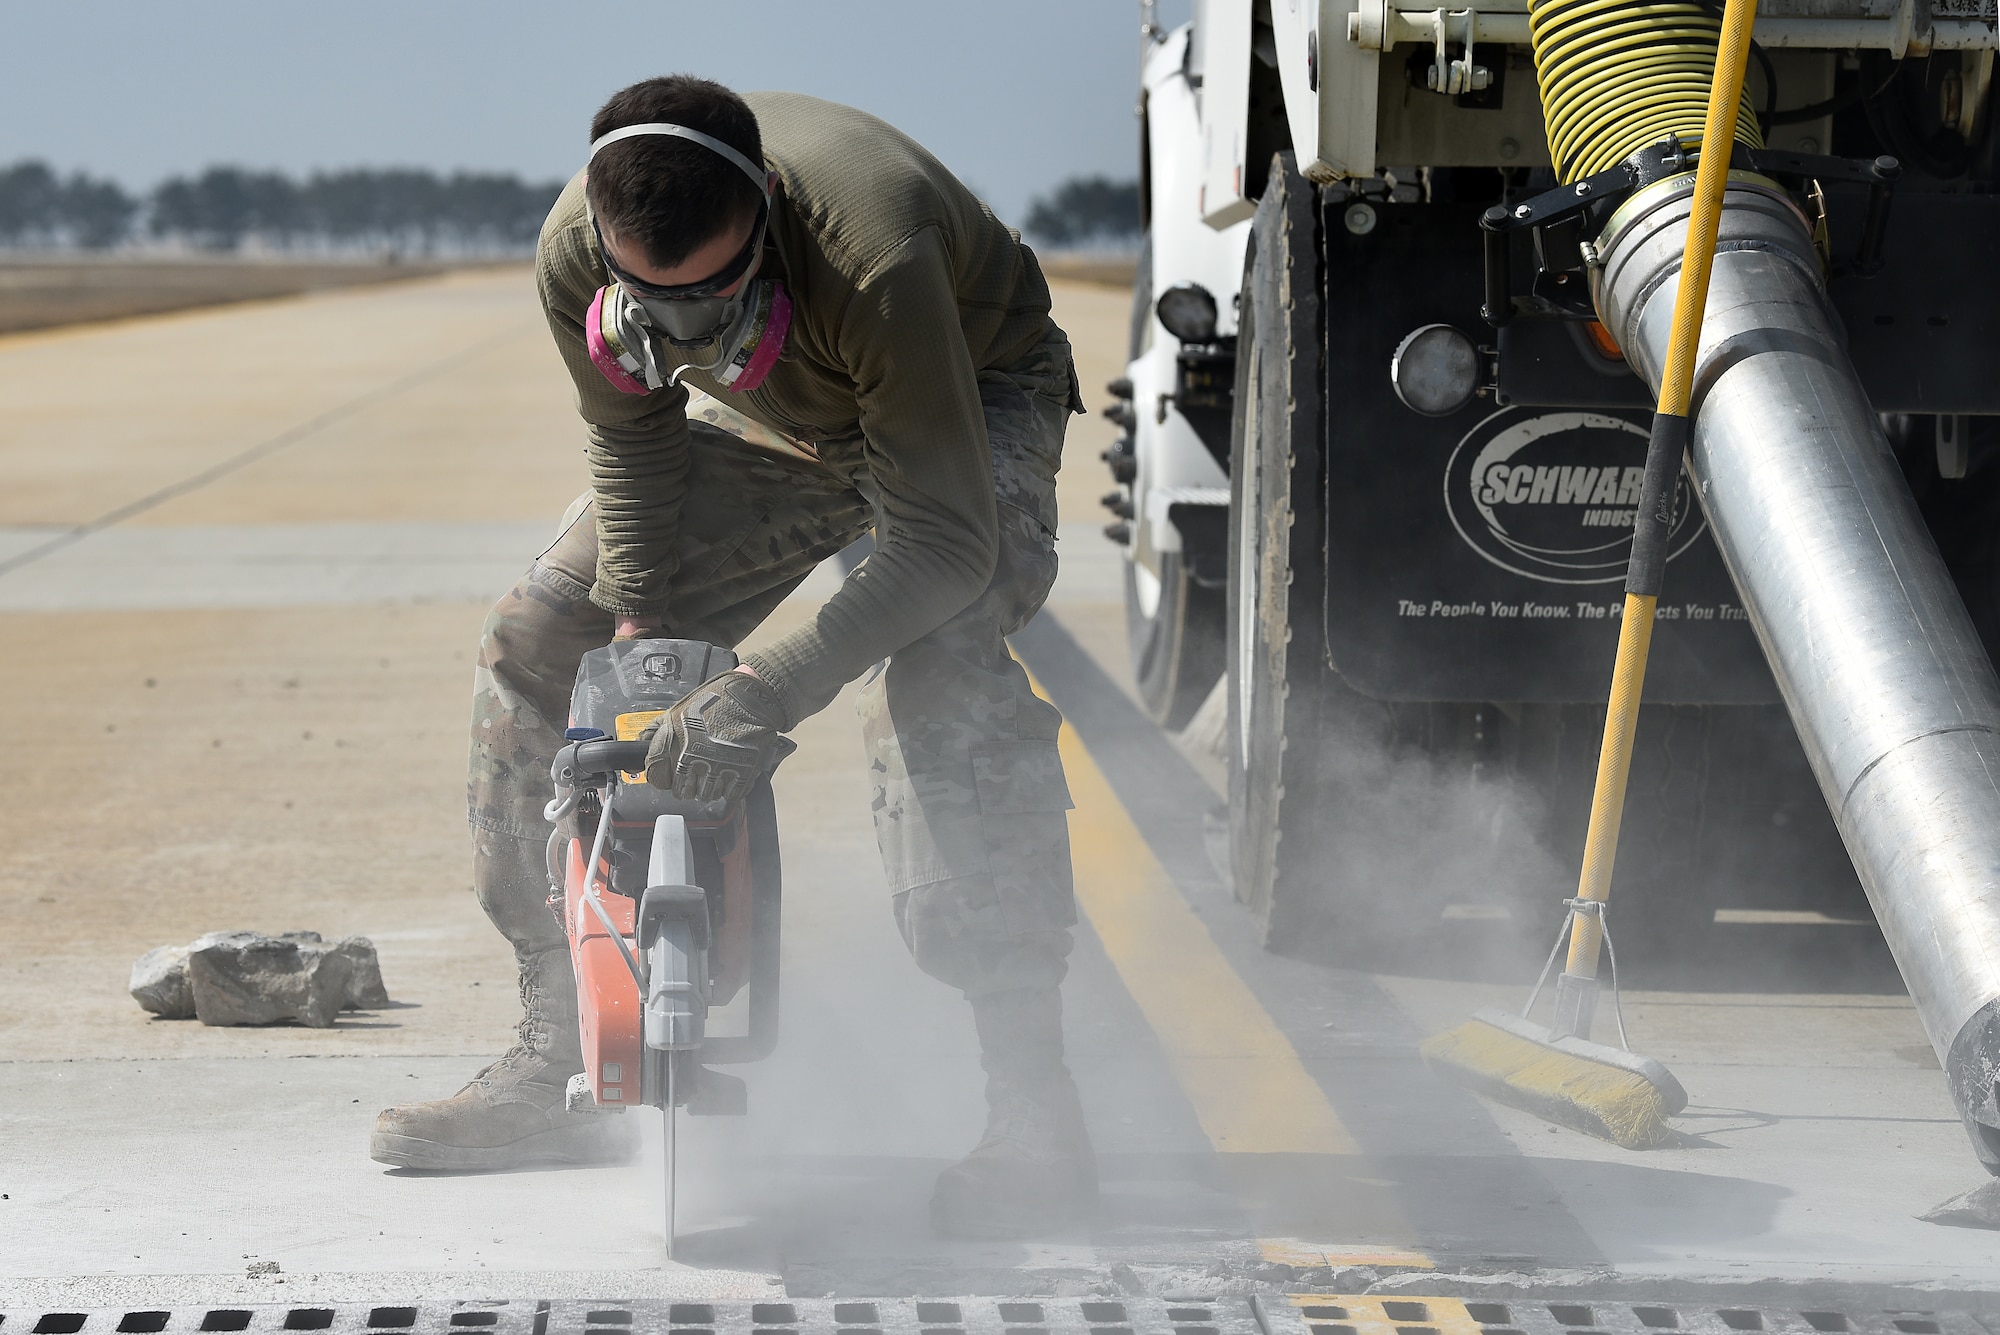 Airman 1st Class Chase Pavlenko, 8th Civil Engineer Squadron pavements and heavy equipment operator, uses a K-12 saw to cut out cracked concrete on a taxiway at Kunsan Air Base, Republic of Korea, March 23, 2021. The 8th CES is replacing failed concrete on the flightline to prevent foreign object debris hazards. (U.S. Air Force photo by Senior Airman Suzie Plotnikov)